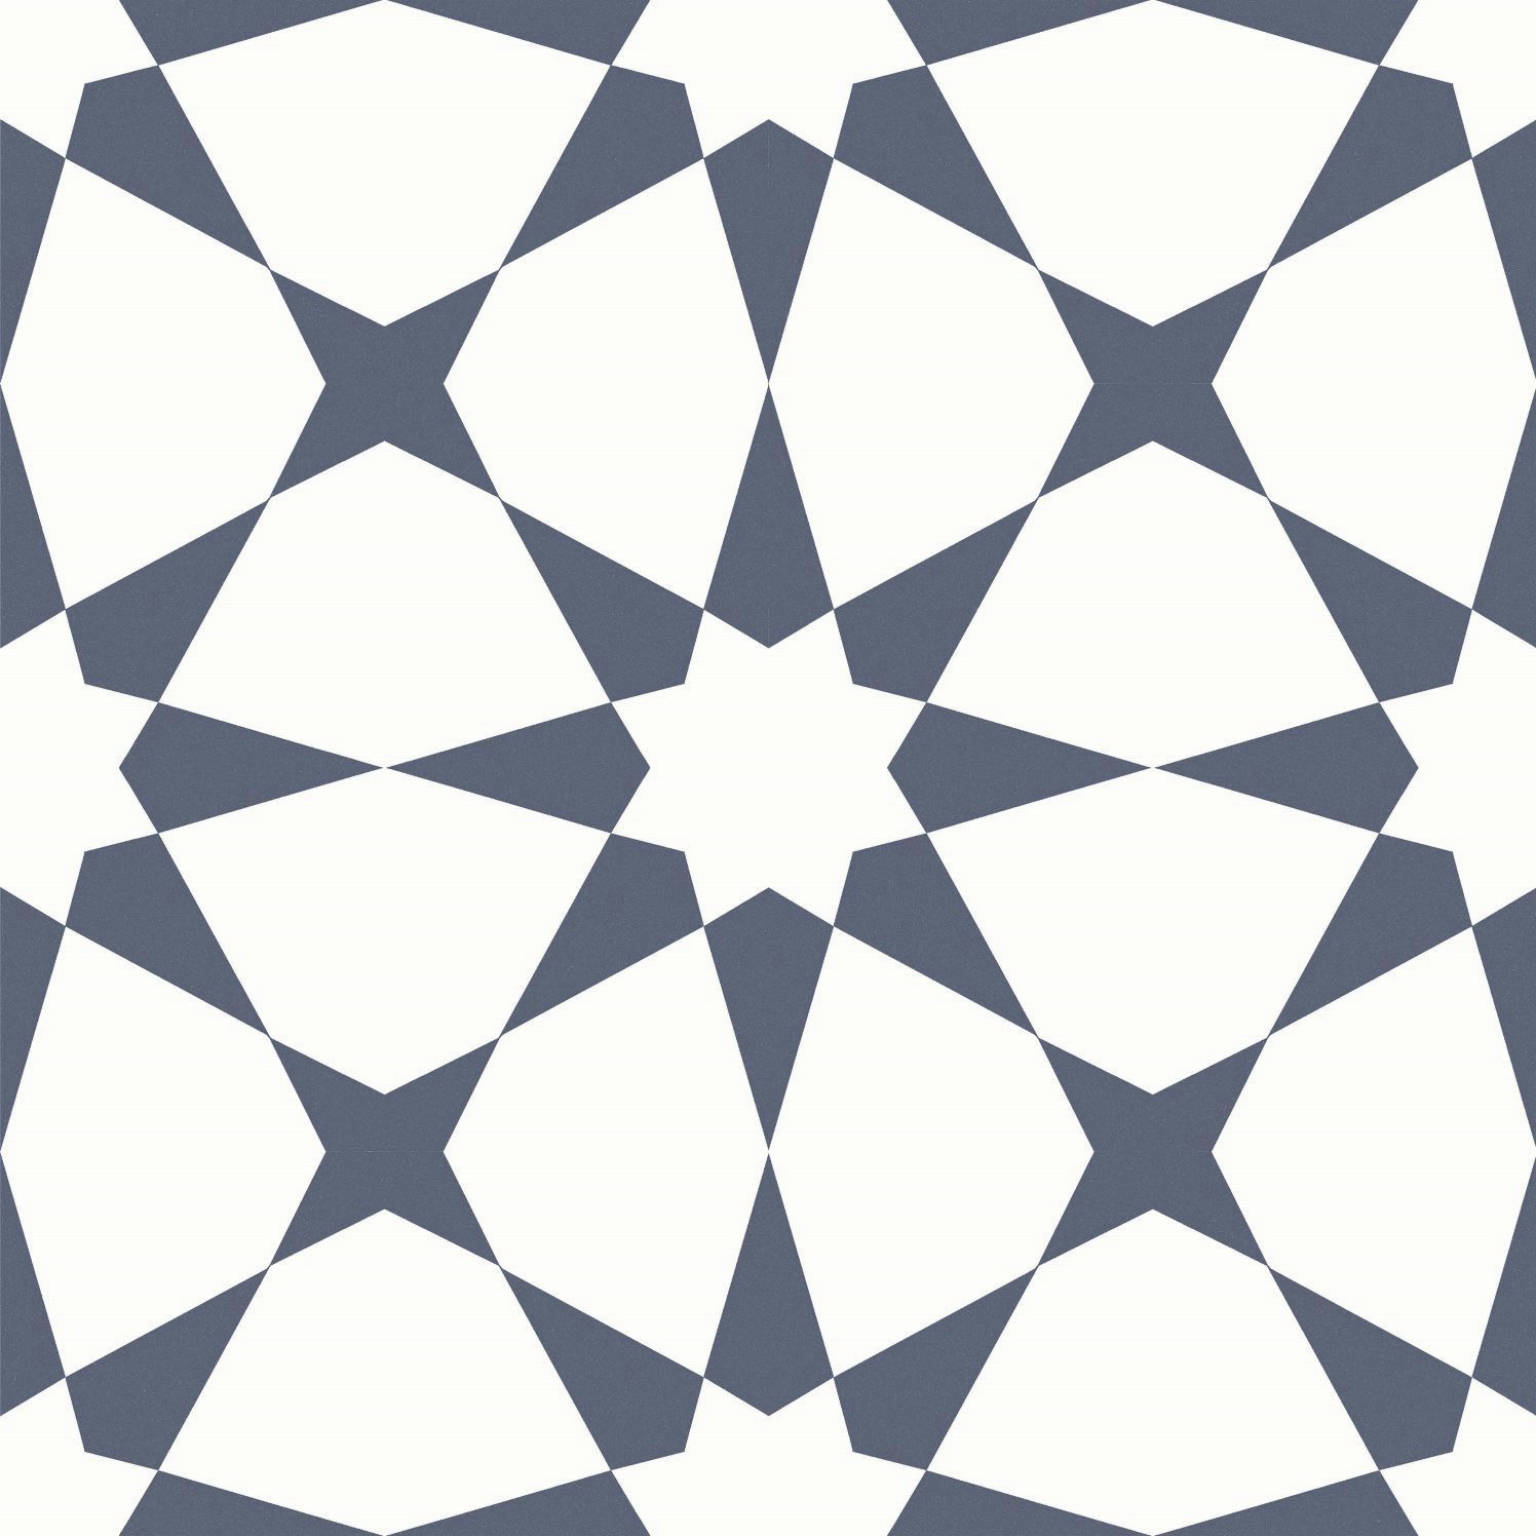 Dorian Azul Star | Stones & More | Finest selection of Mosaics, Glass, Tile and Stone